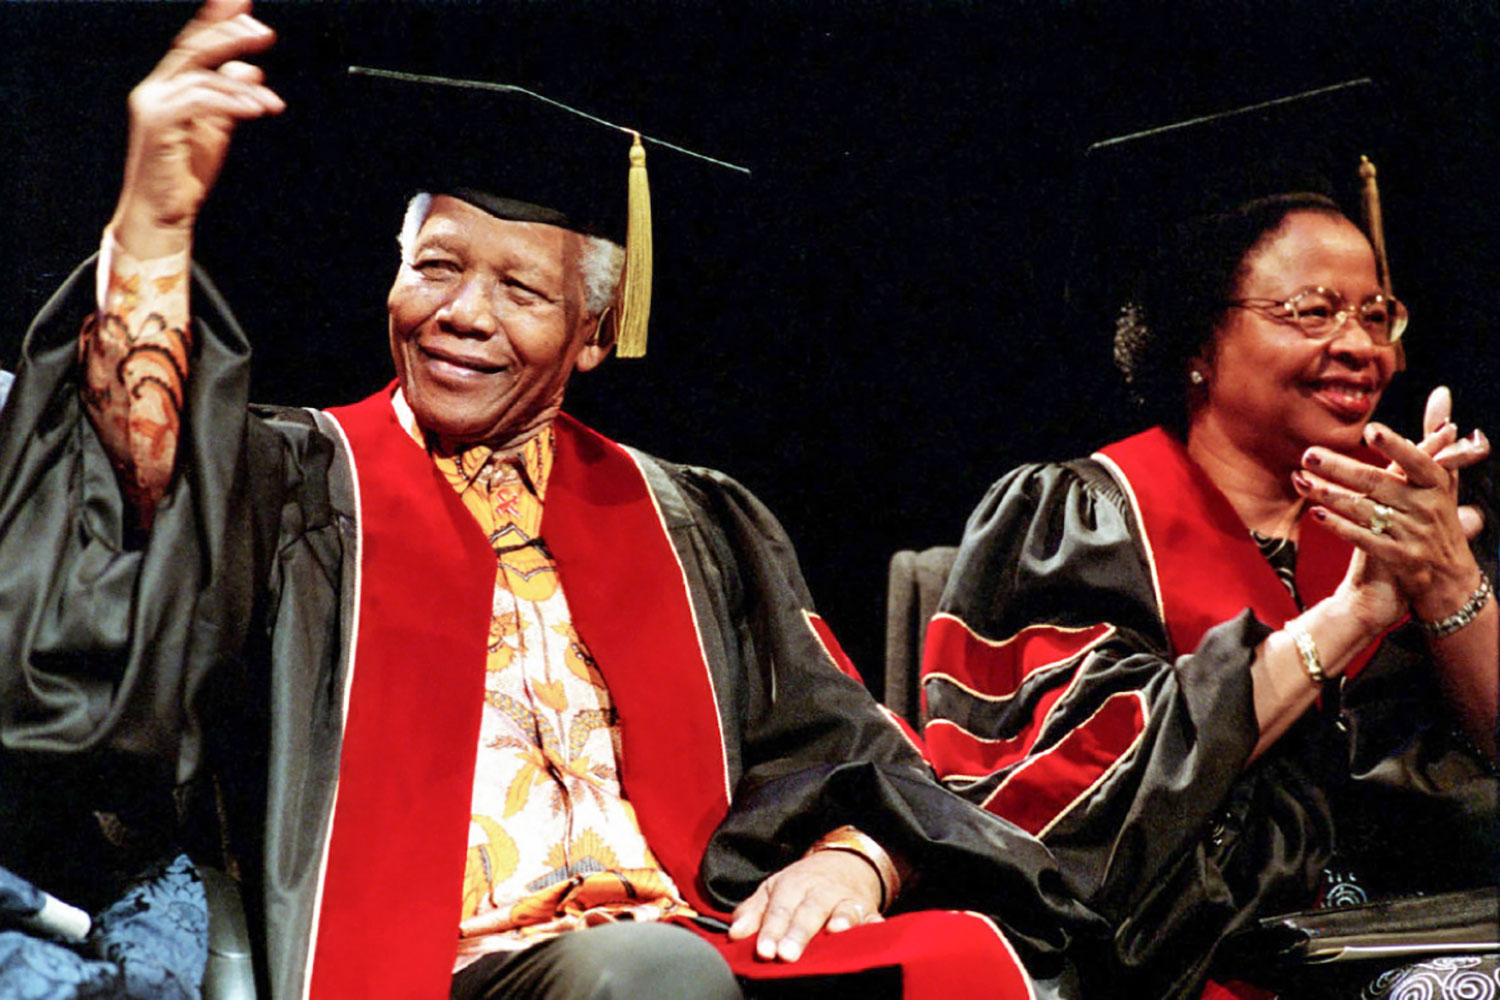 Nelson and Winnie Mandela in black and red stoles.